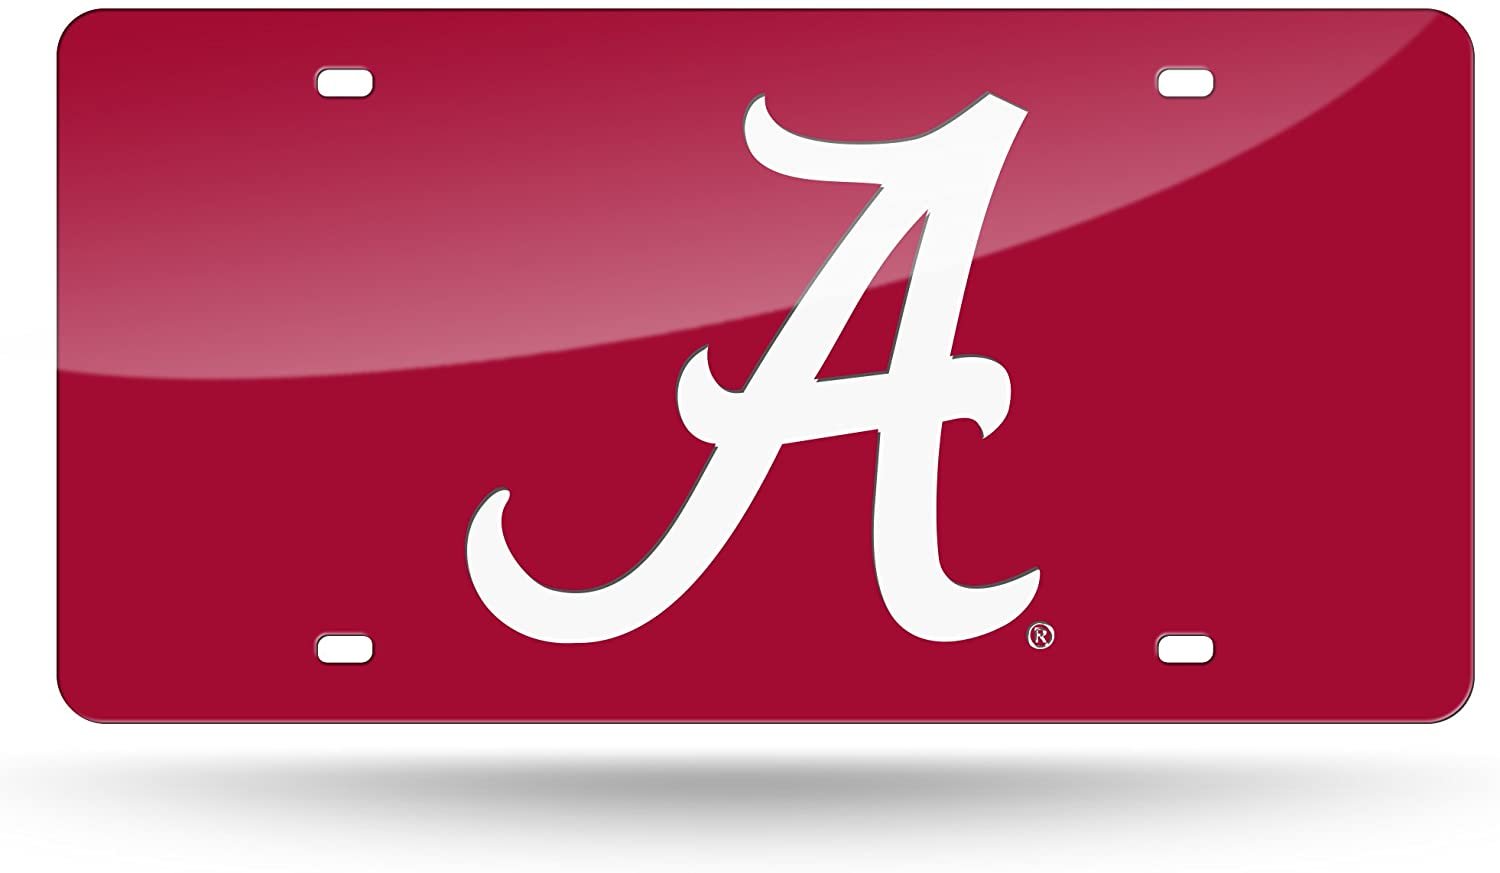 University of Alabama Crimson Tide Premium Laser Cut Tag License Plate, Red, Mirrored Acrylic Inlaid, 12x6 Inch